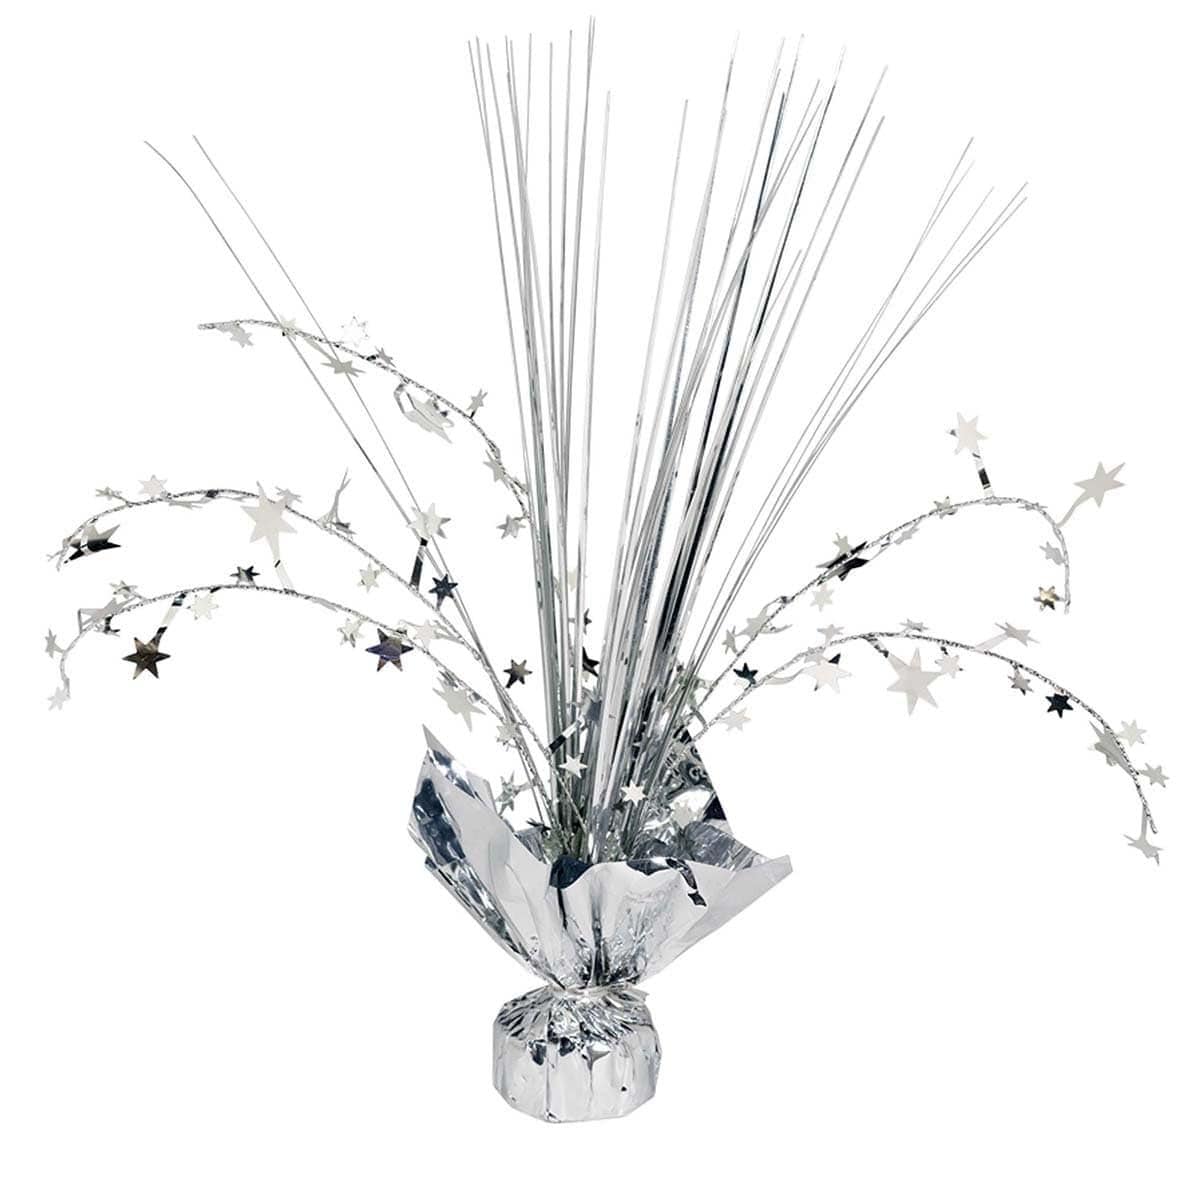 Buy Decorations Spray Centerpiece 12 In - Silver sold at Party Expert